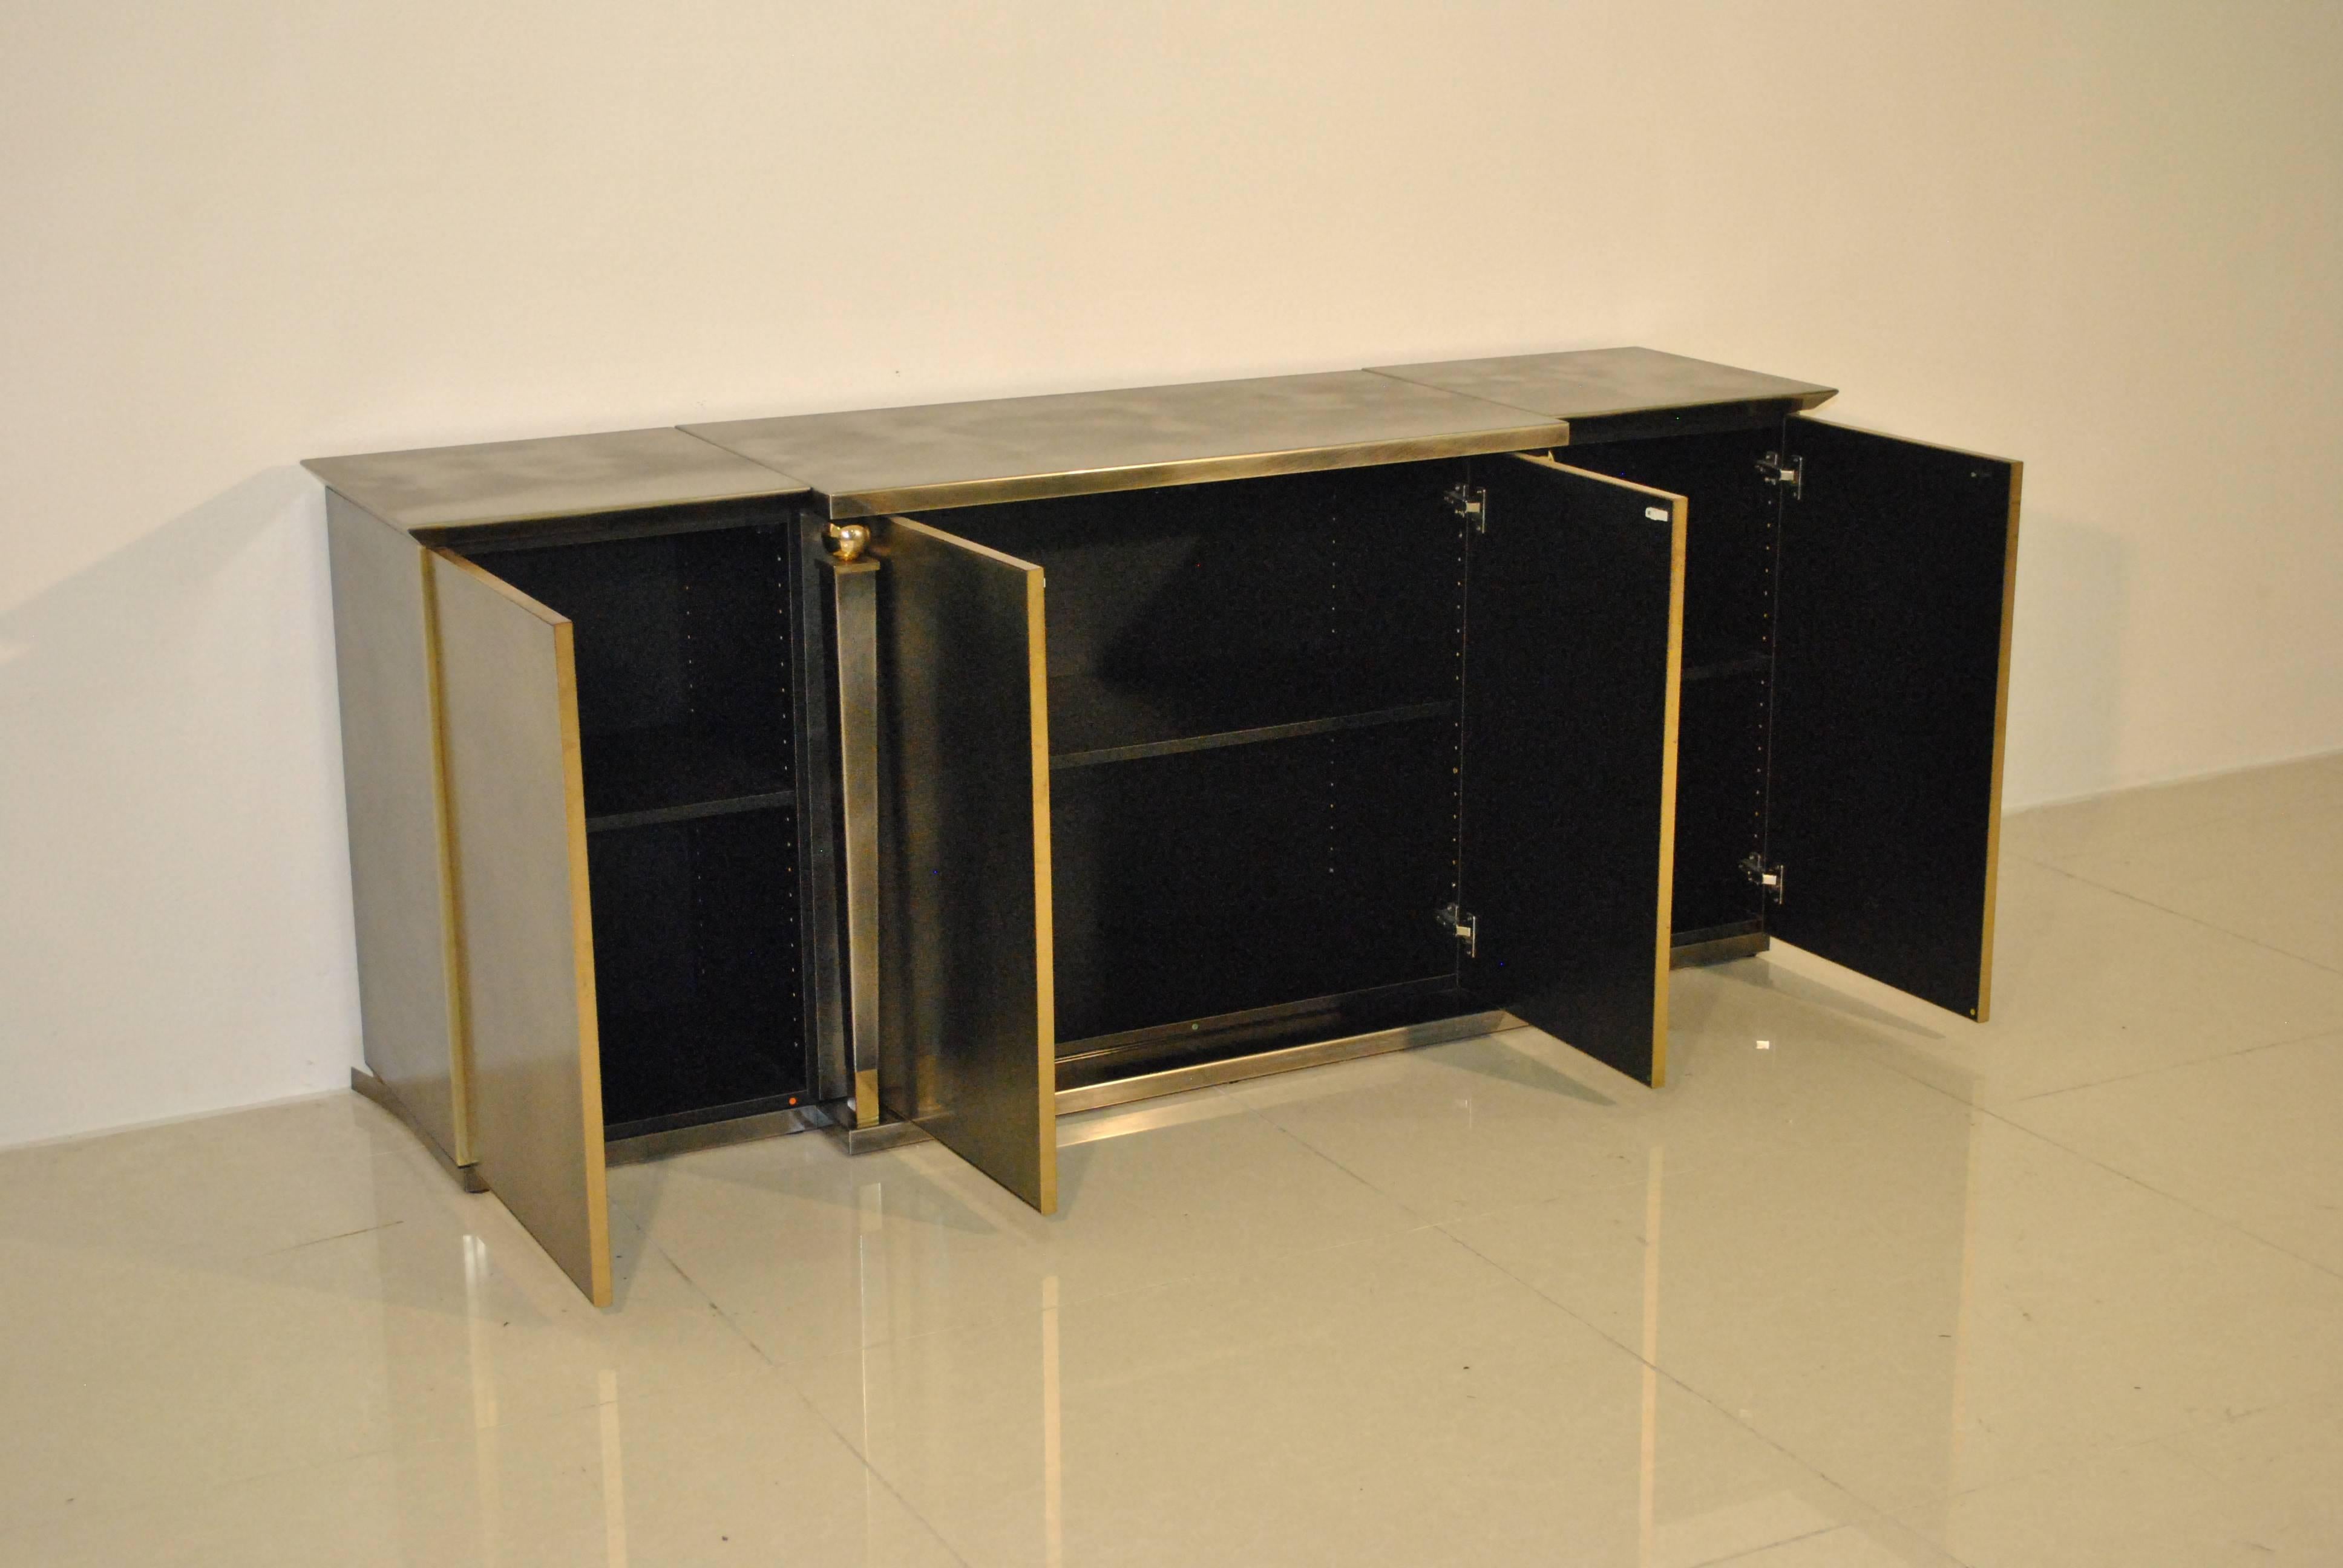 Brushed Steel and Gold Sideboard by Belgo Chrome, 1980s For Sale 2